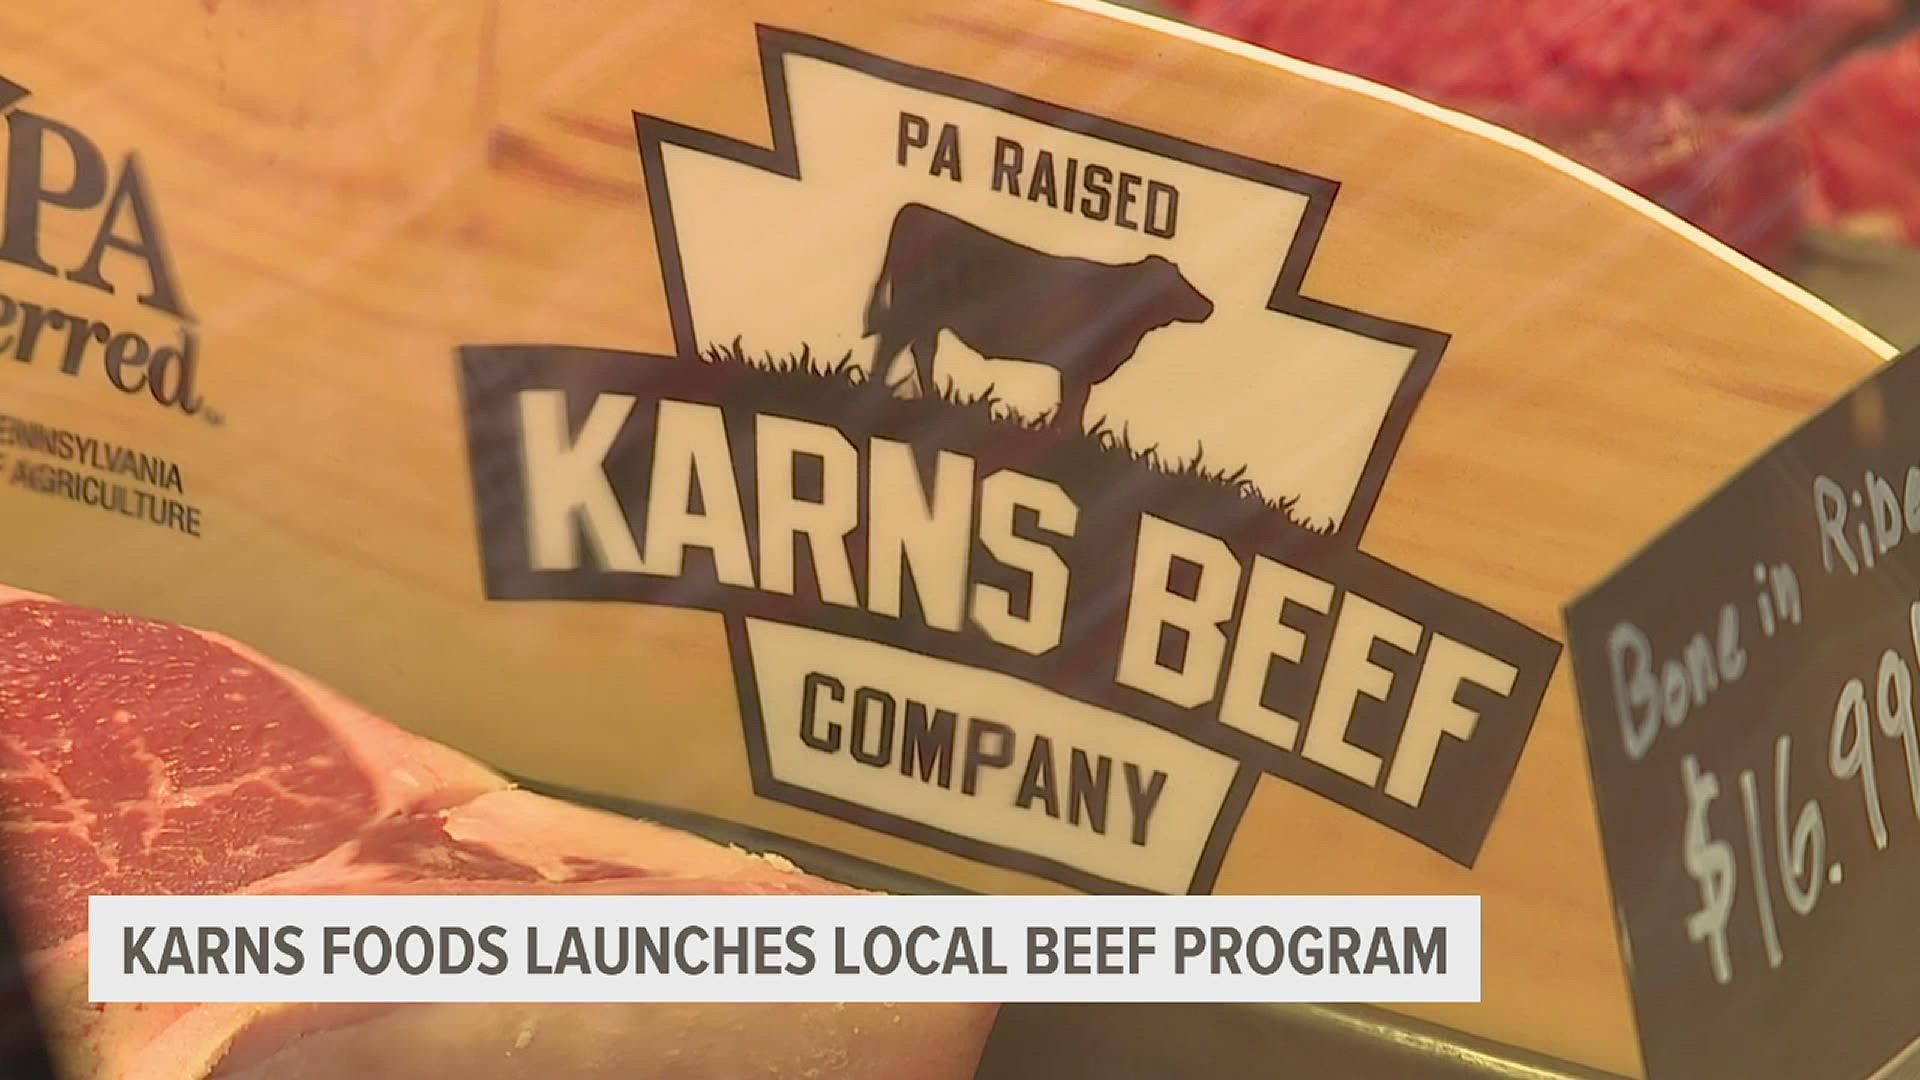 Karns Foods in Central Pennsylvania provides their shoppers with locally sourced beef through partnerships with local farms.